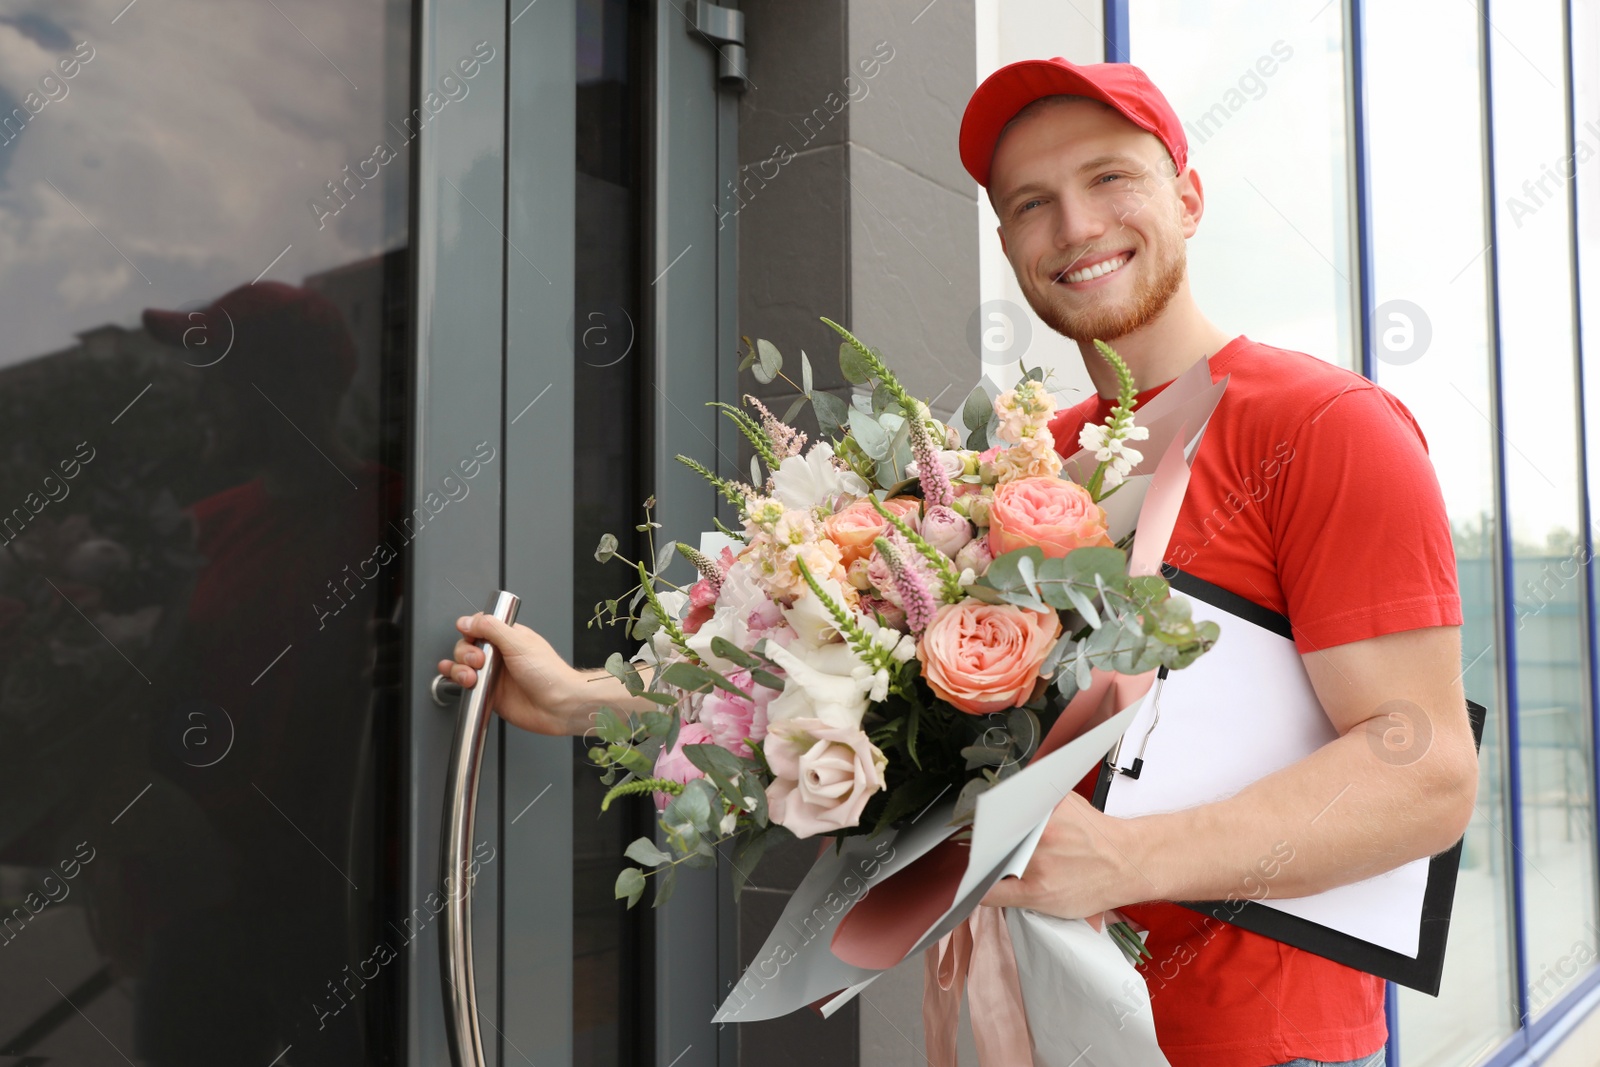 Photo of Delivery man with beautiful flower bouquet near front door